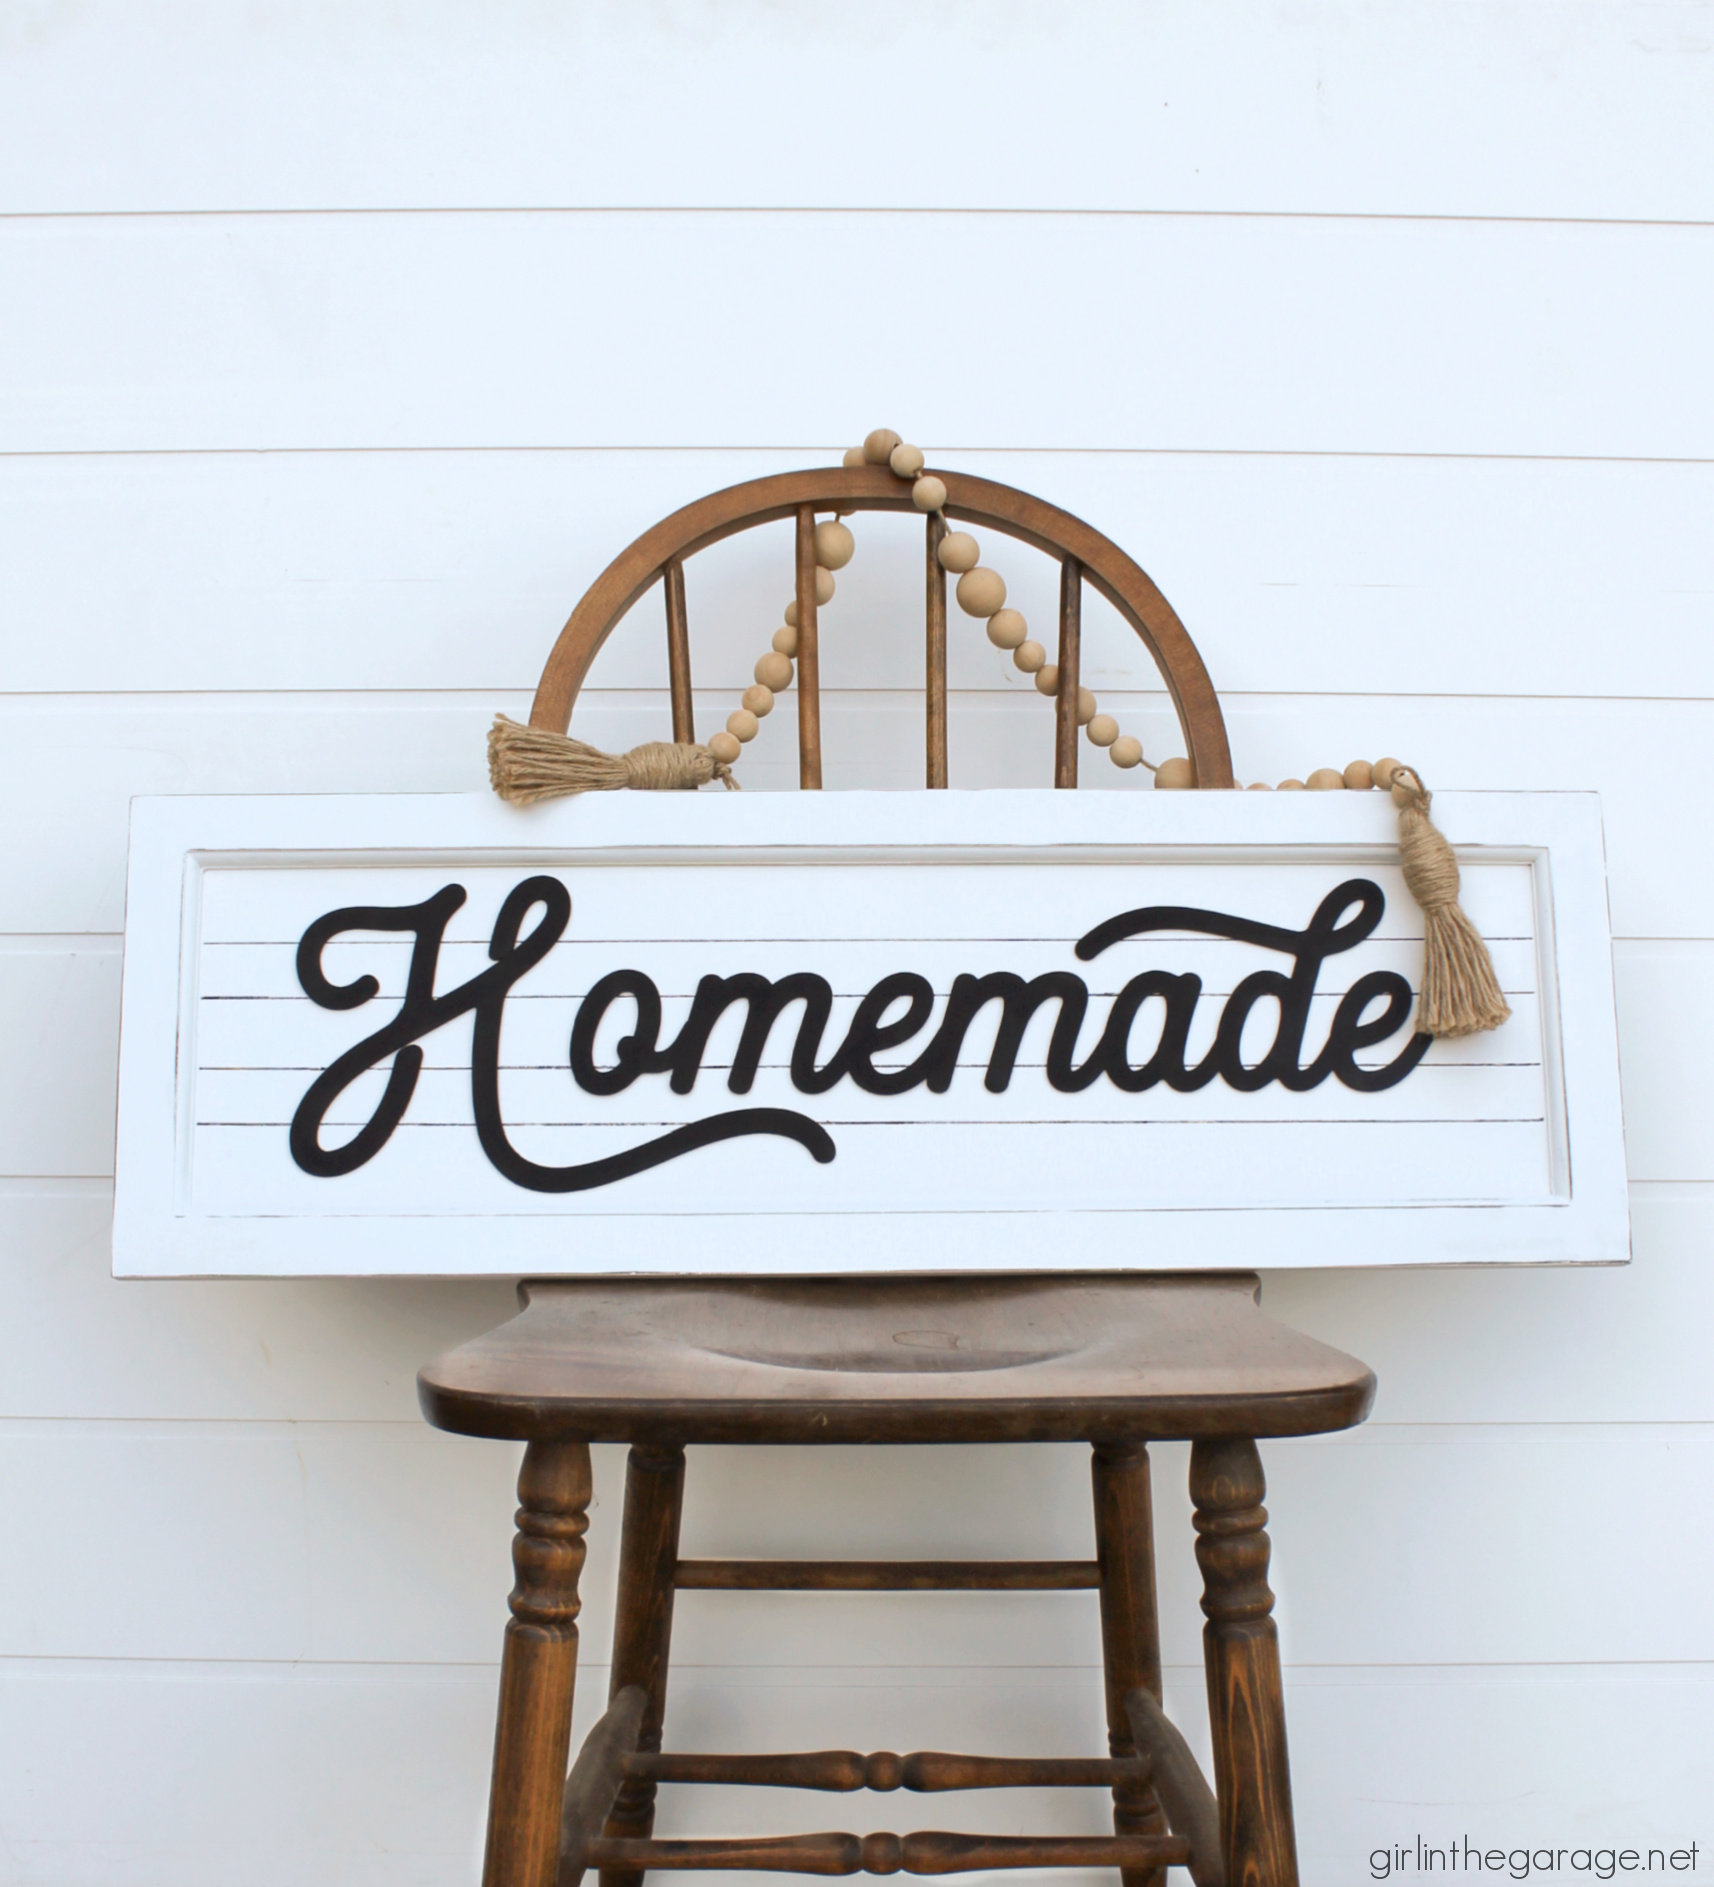 How to transform and repurpose old Goodwill art into a beautiful farmhouse-style sign for your home. Easy home decor ideas by Girl in the Garage